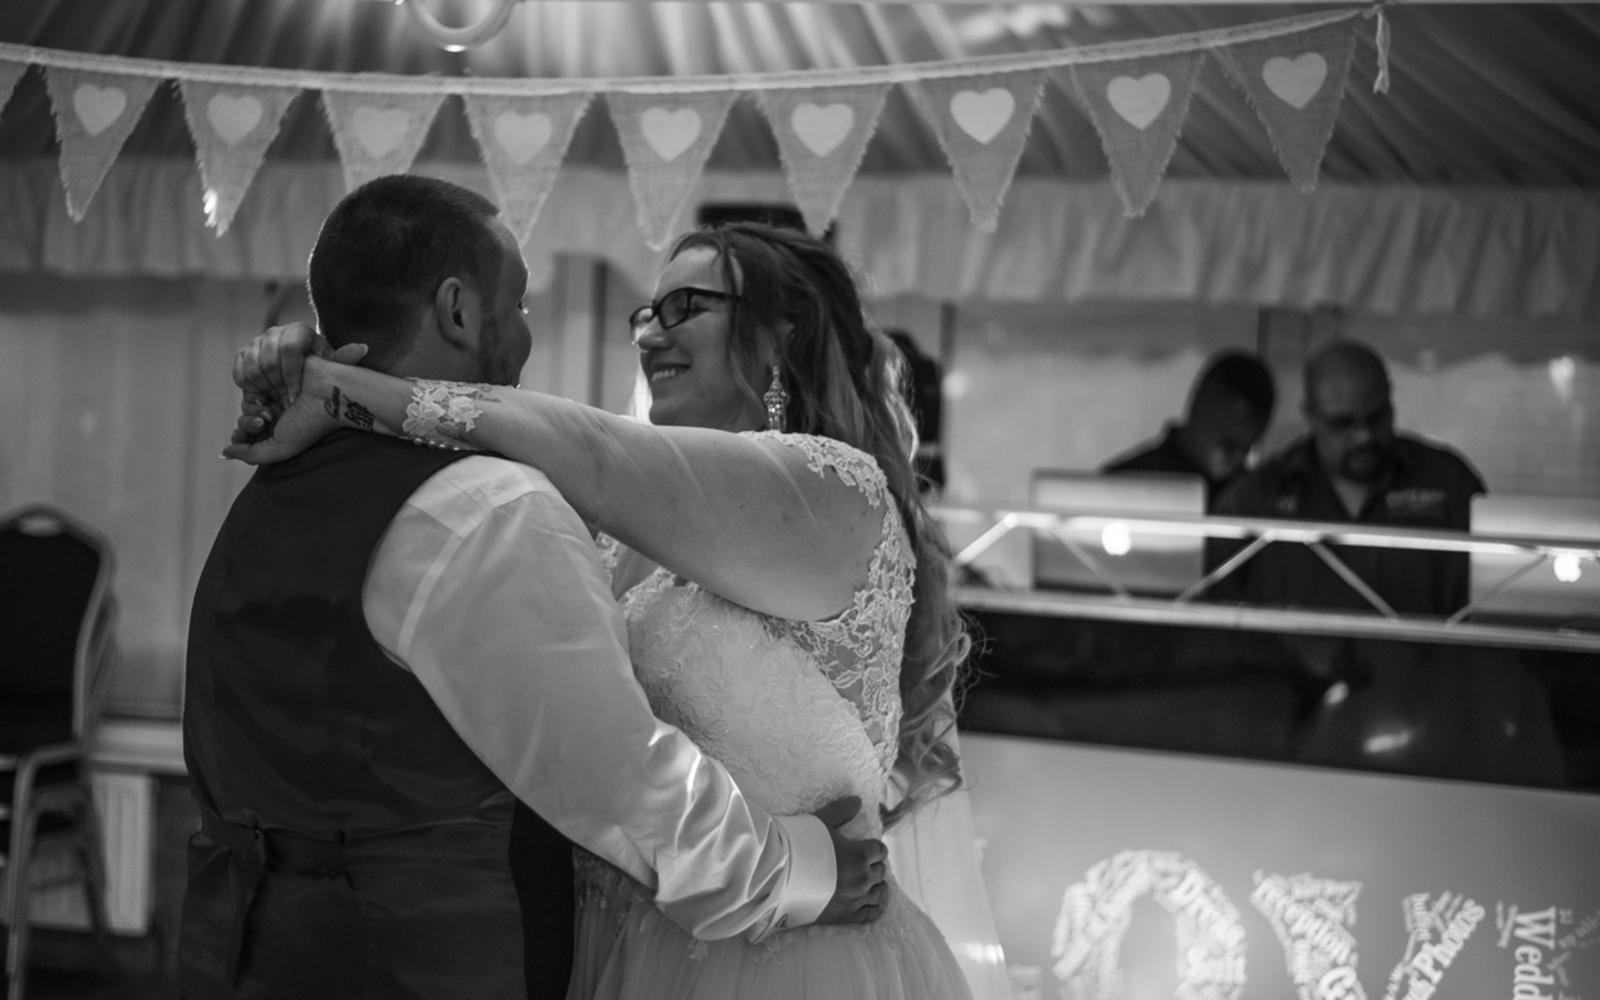 Real Wedding Whitewed Directory approved photographer Strike A Pose Photography Grasmere House Hotel Salisbury bride groom first dance